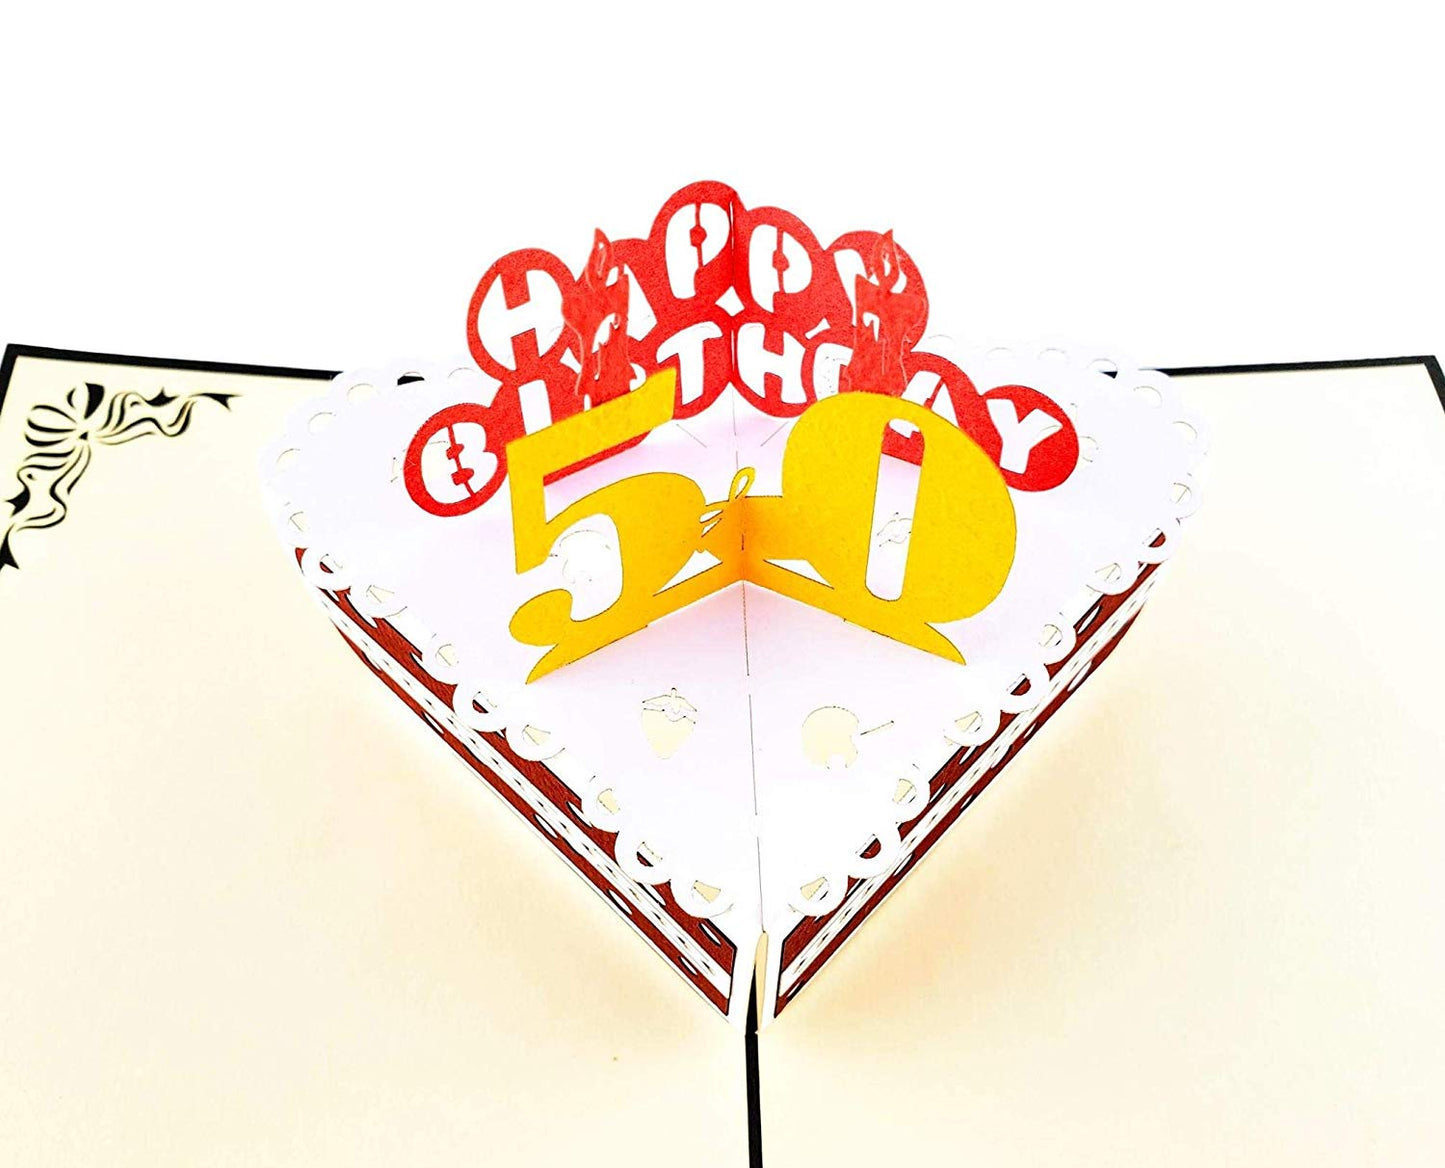 50th Birthday Cake 3D Pop Up Card - Birthday - Fun - Special Days - iGifts And Cards